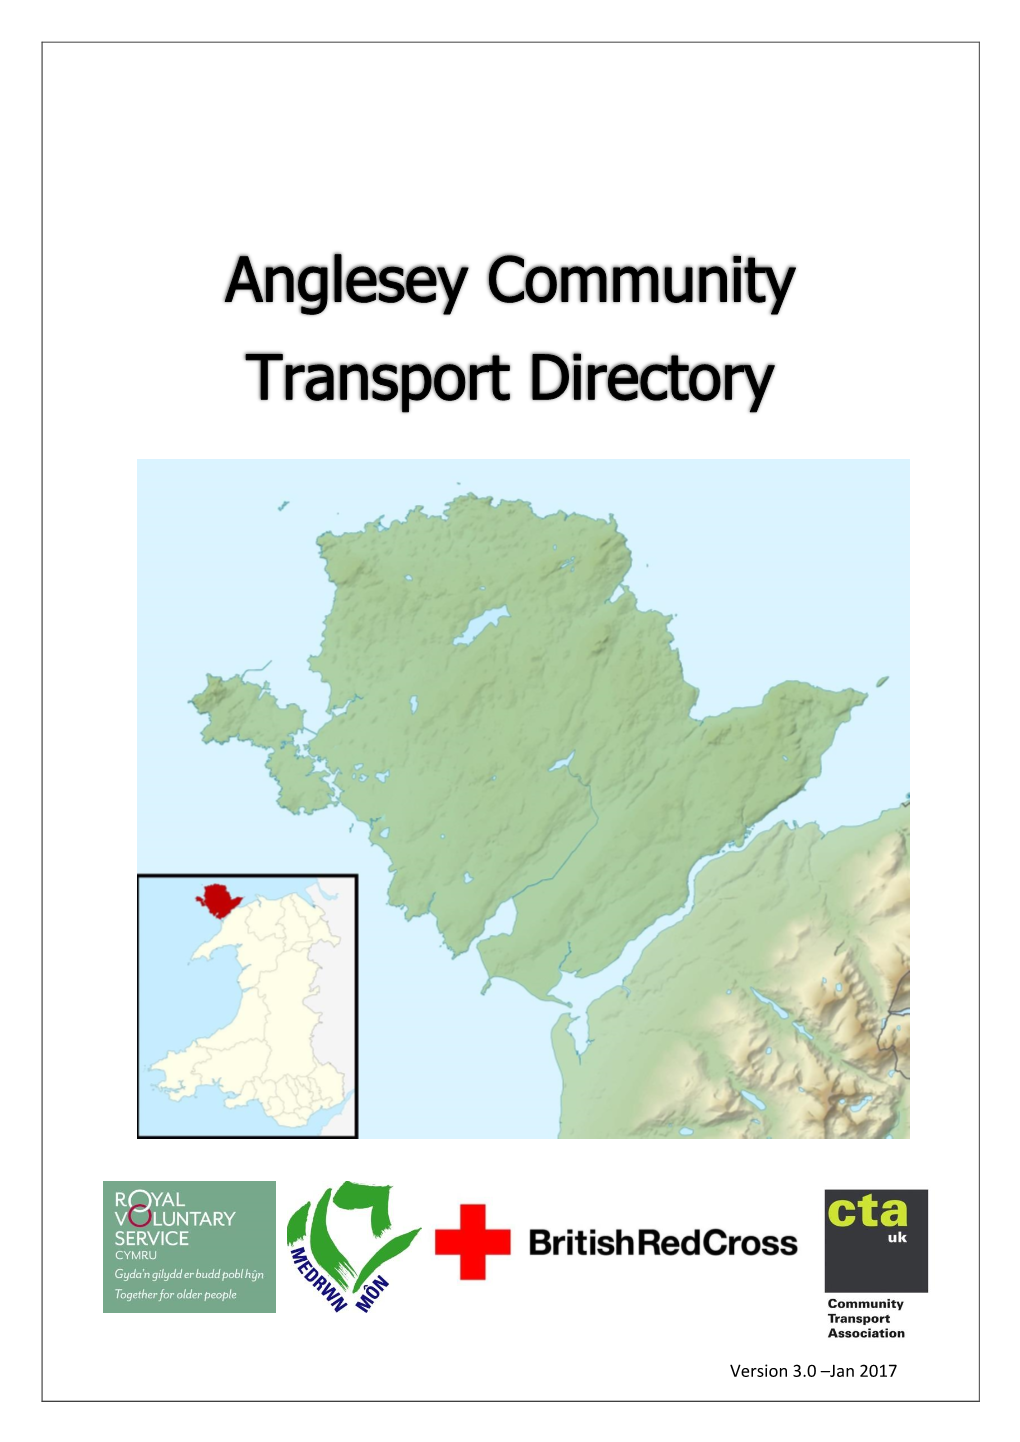 Anglesey Community Transport Directory